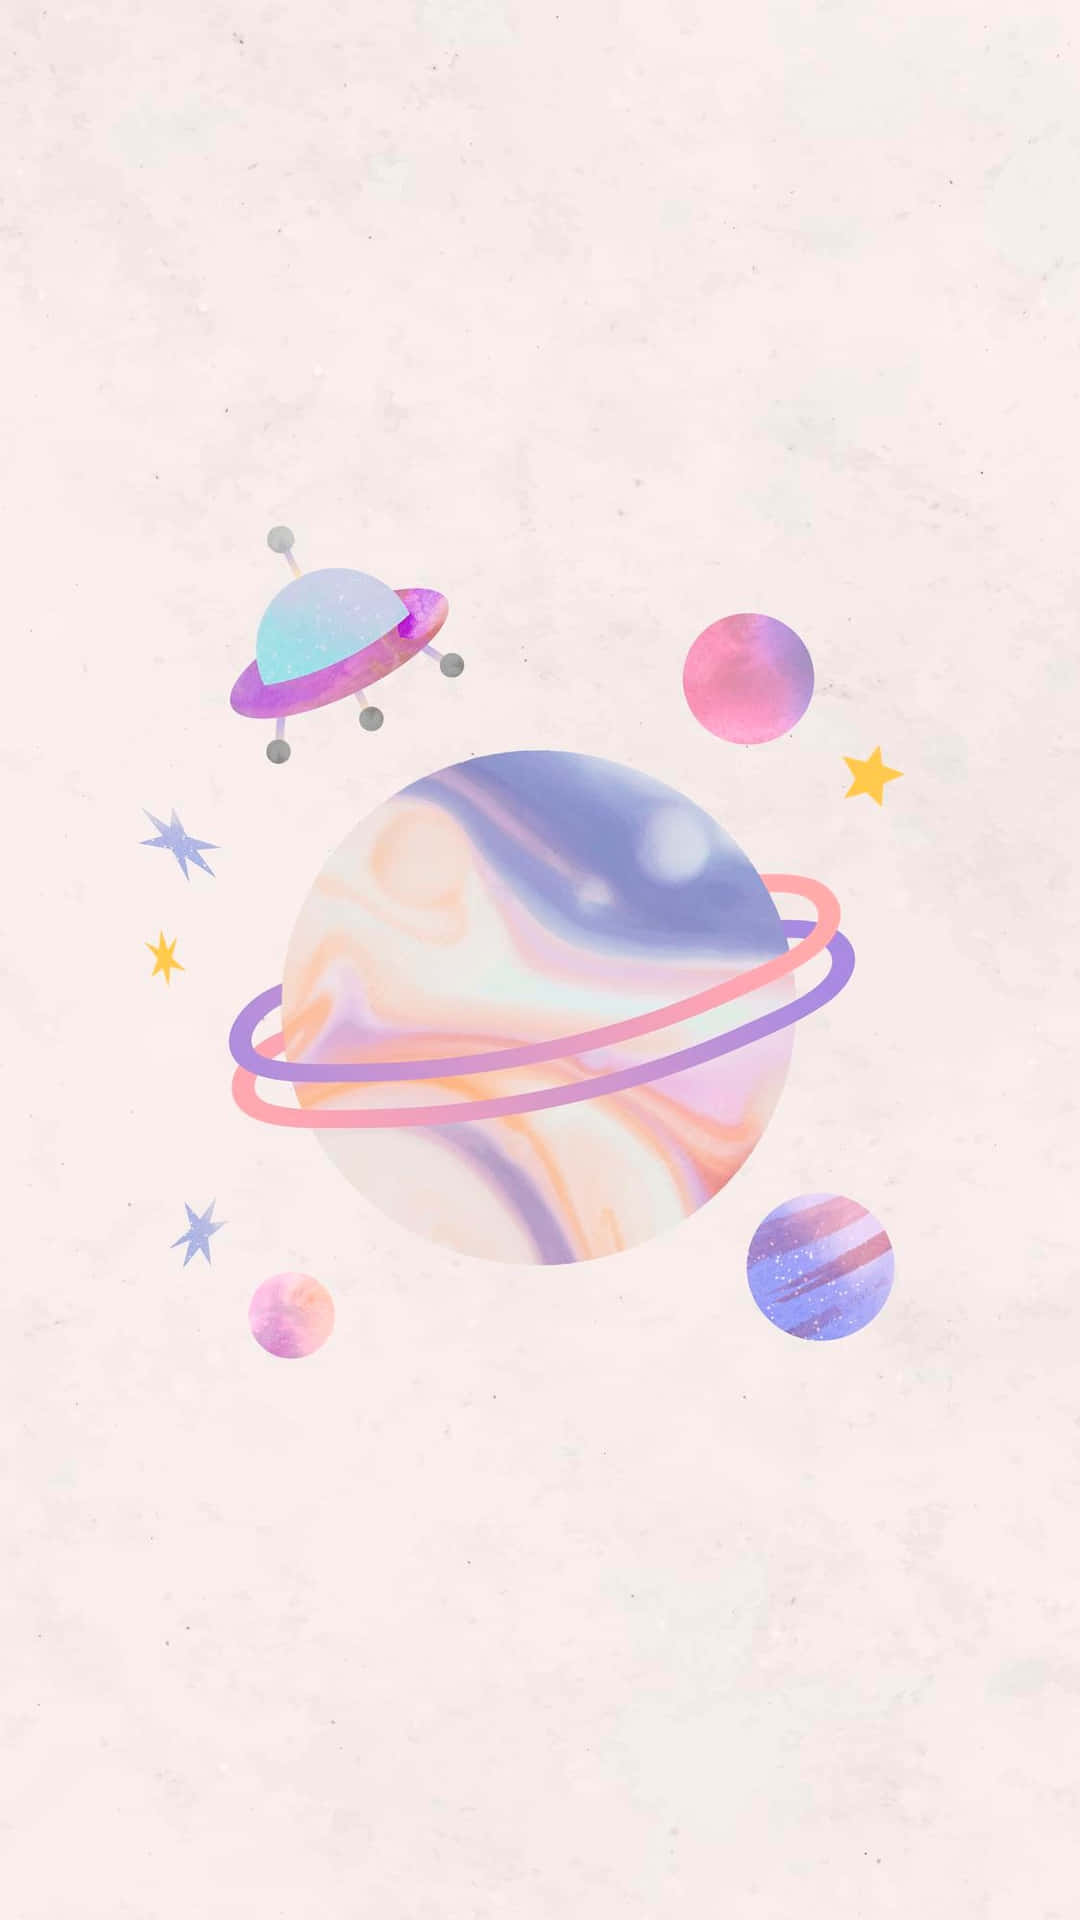 Immerse yourself in the universe of cuteness with Kawaii Galaxy! Wallpaper